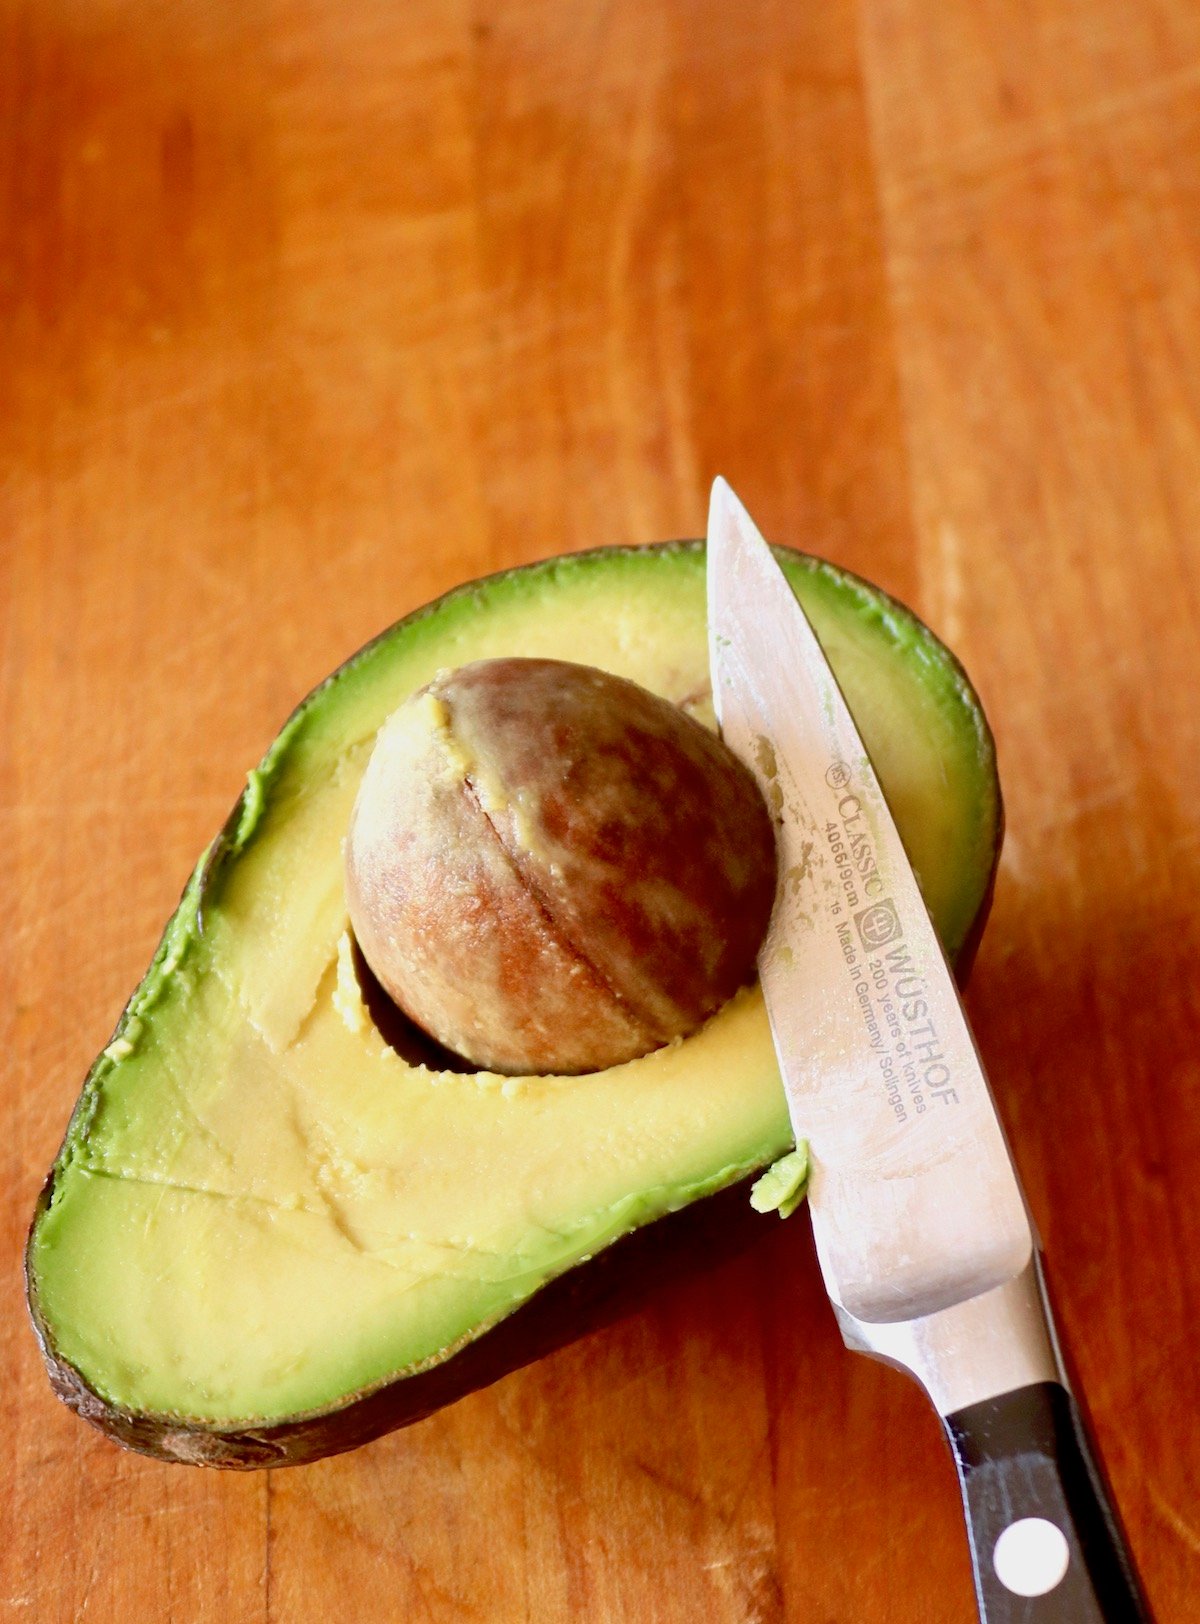 Avocado half on wood board with the pit in place with a paring knife cutting into it and twisting it a bit.